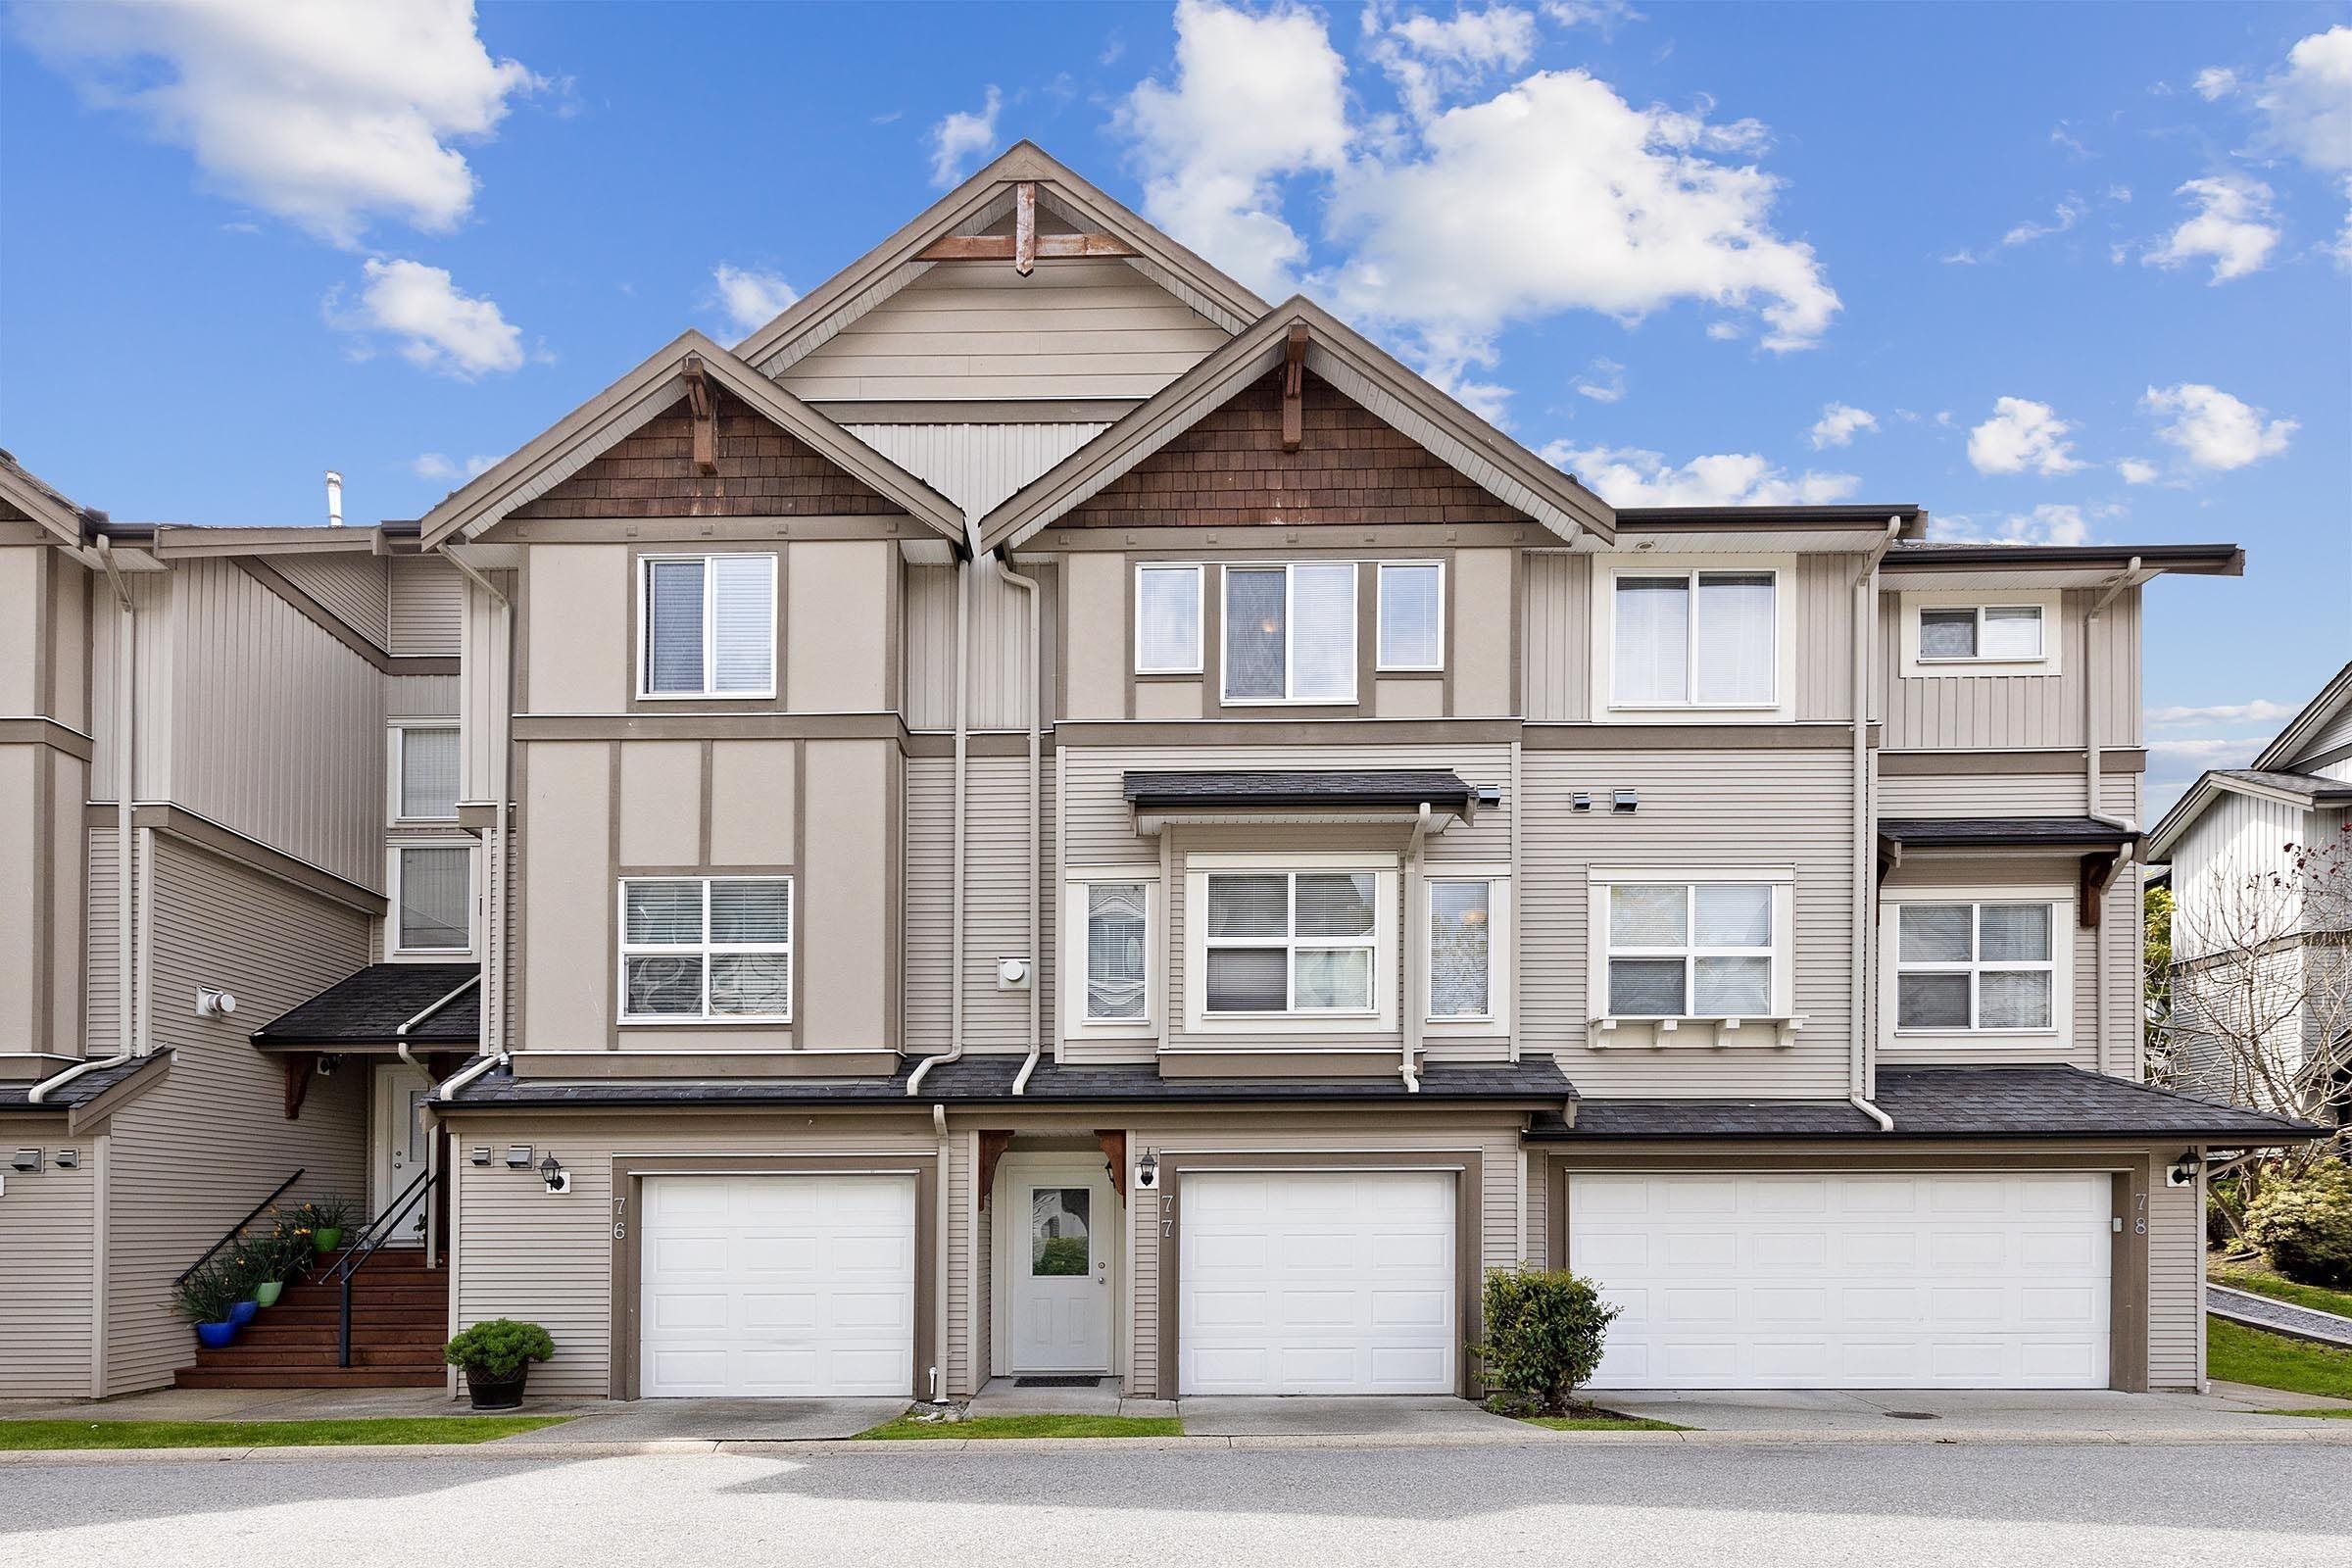 New property listed in Riverwood, Port Coquitlam